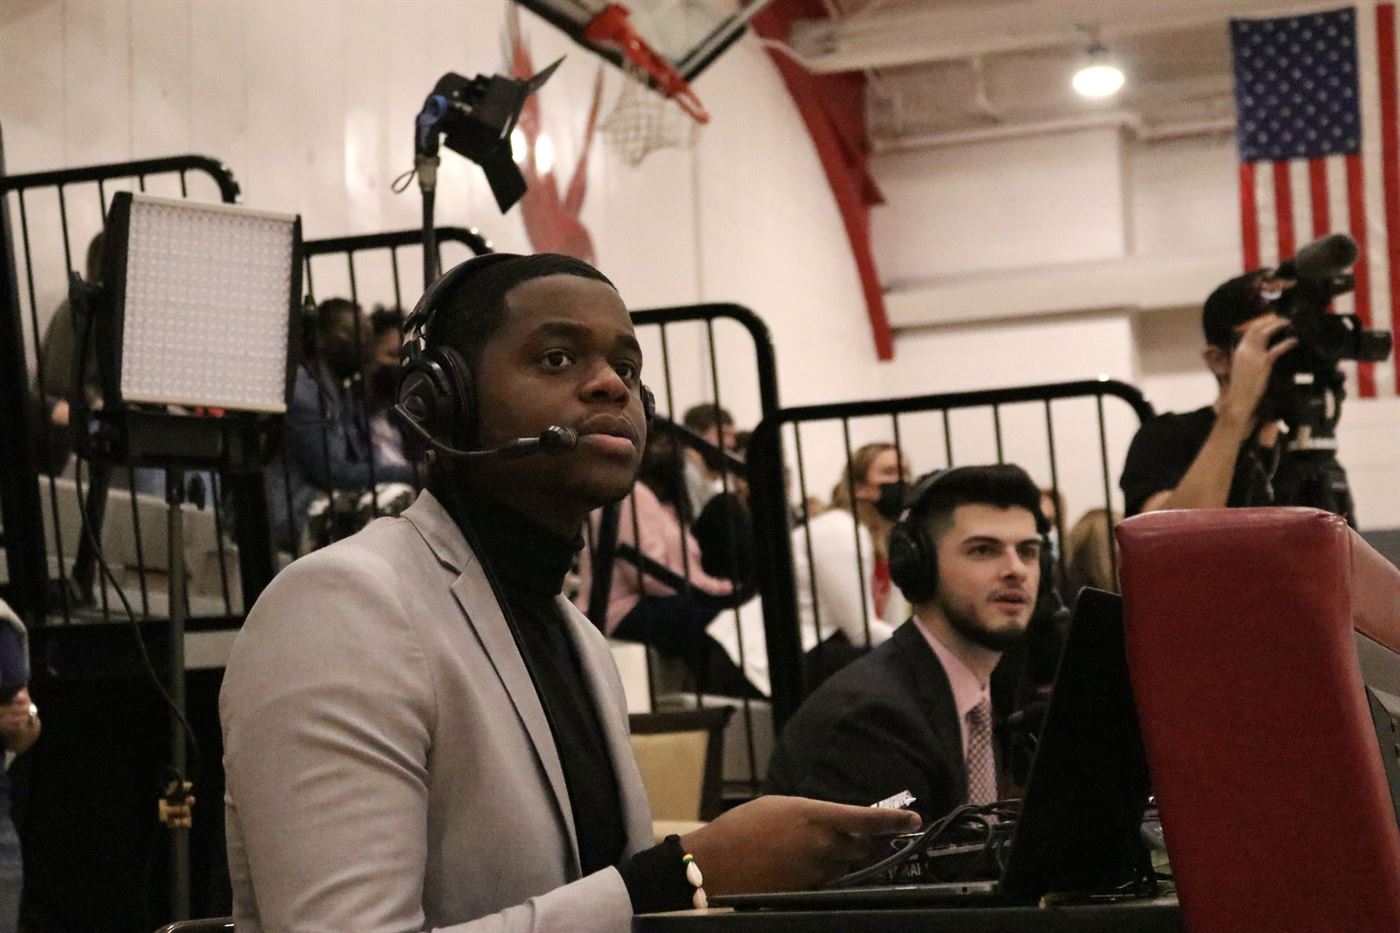 Jonathan Edmond and Jack Barteck analyzing the court during the game Gianna Daginis | The Montclarion